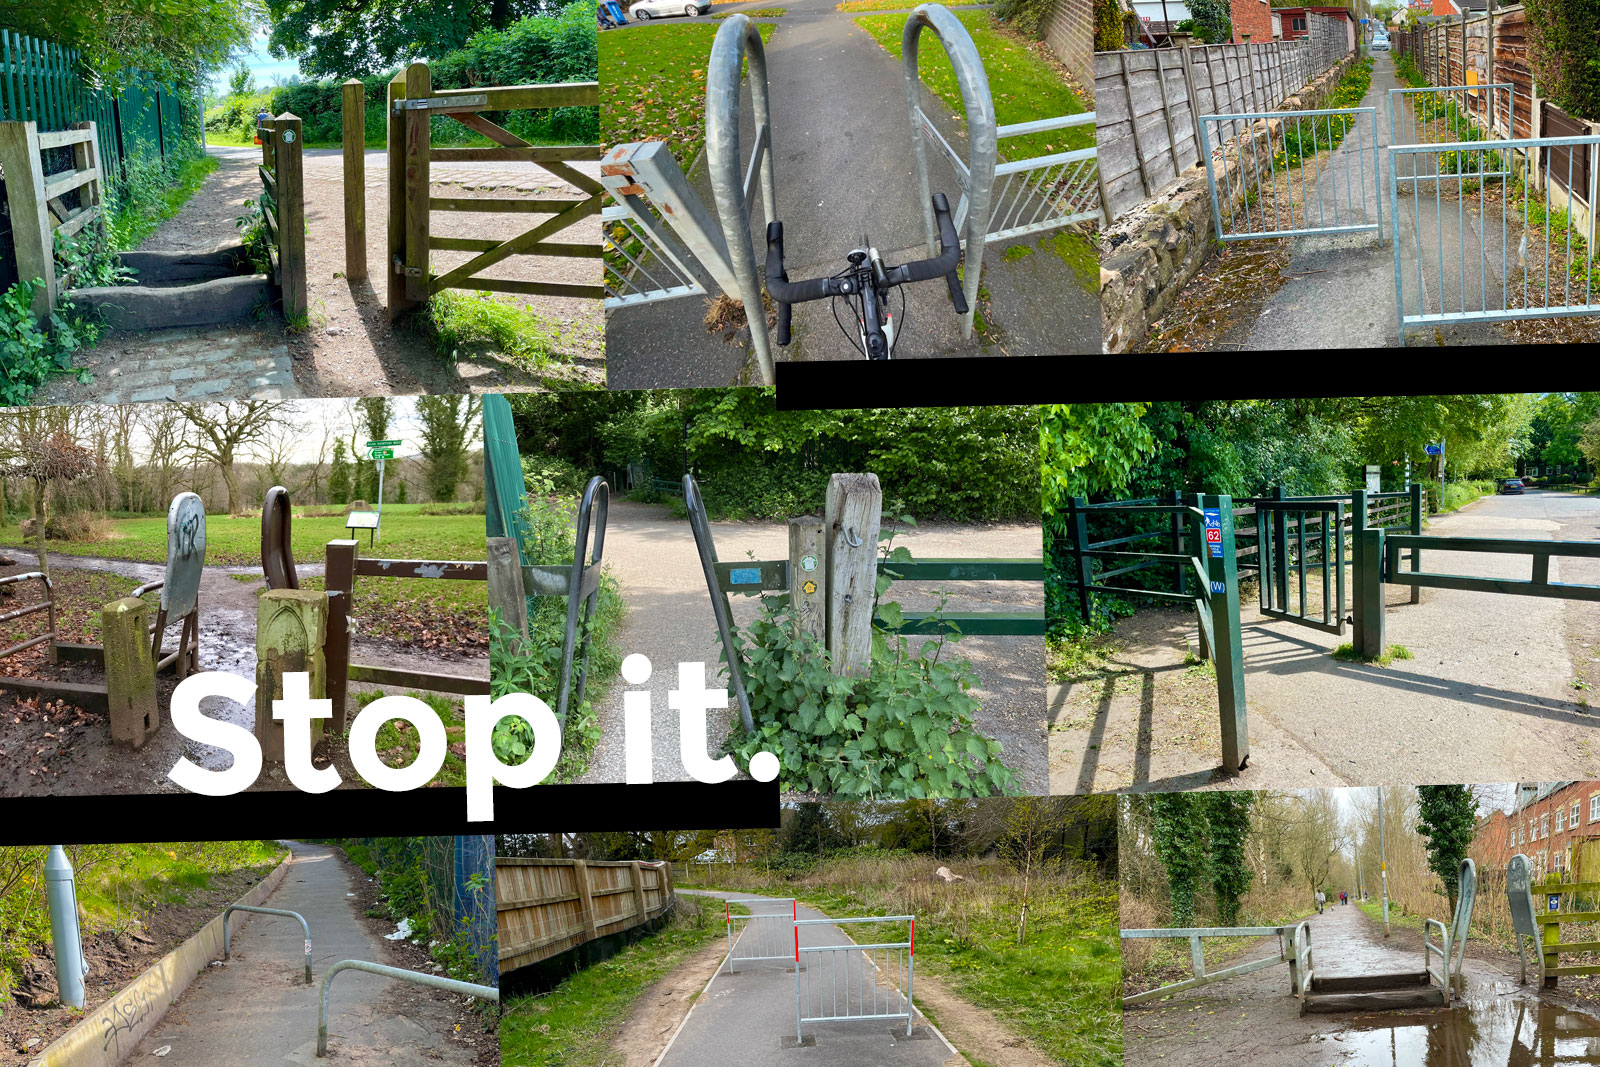 Stop it: A collage of various inaccessible cycle barriers across Stockport, including a-frame barriers, gates, stiles and chicanes.